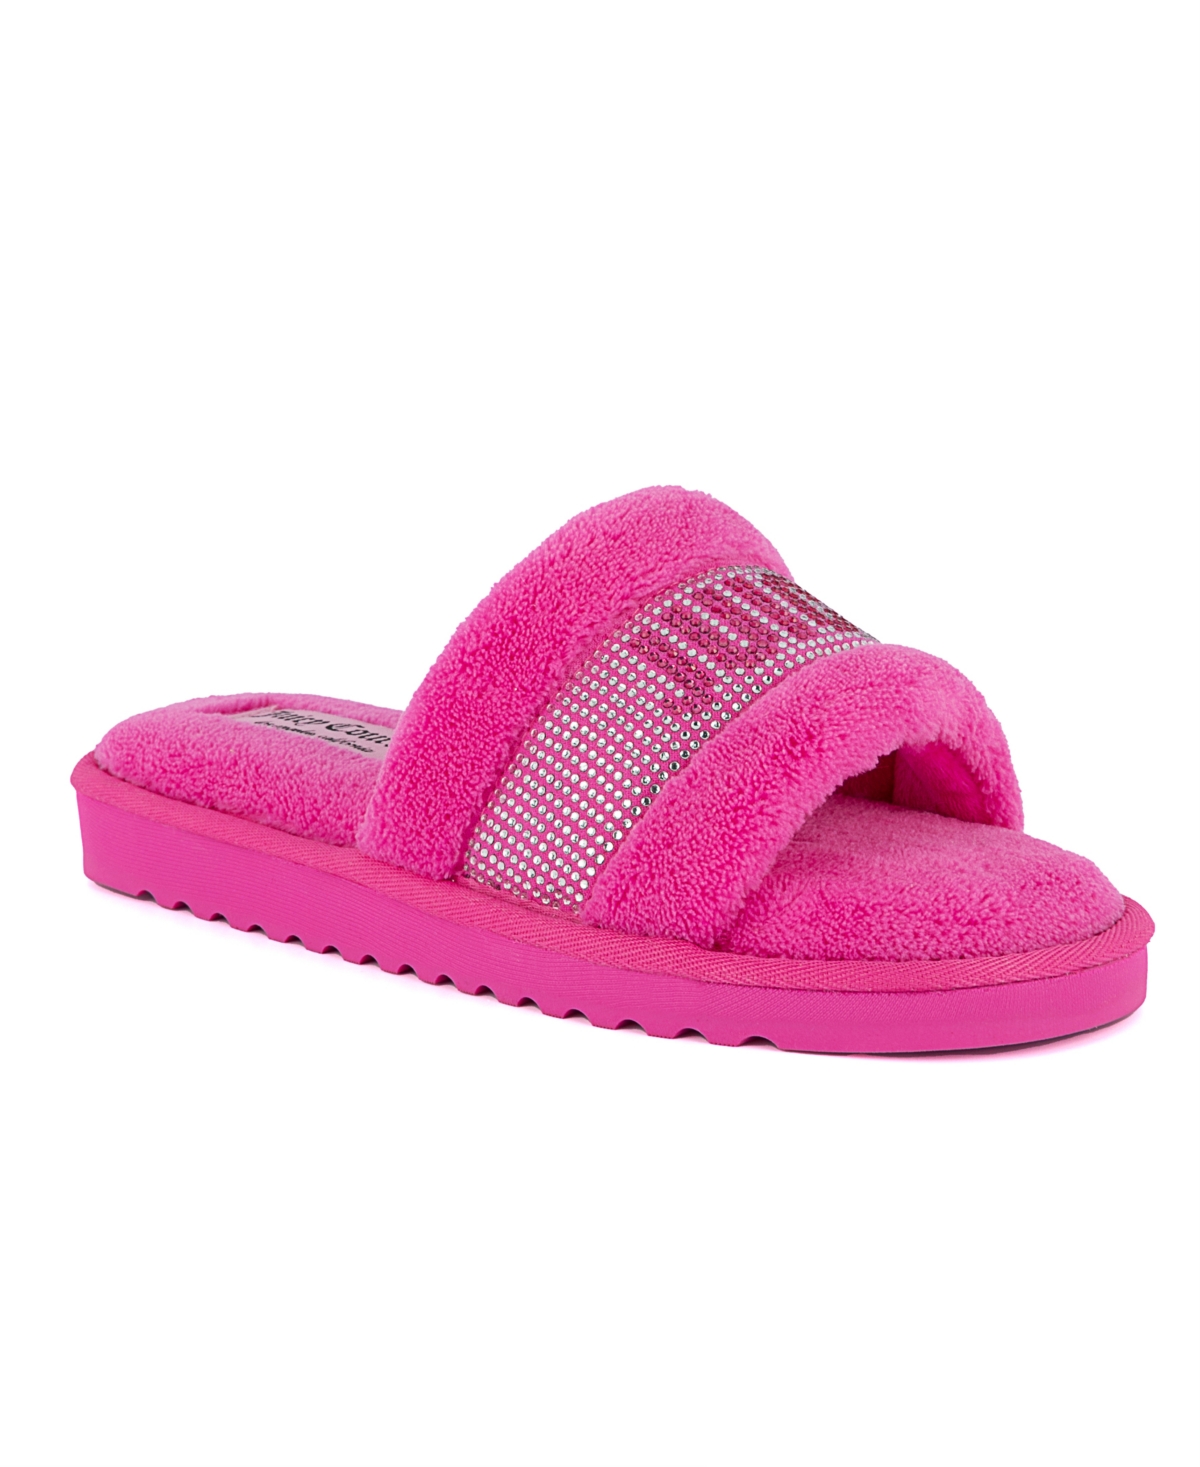 Women's Halo 2 Terry Slippers - Bright Pink